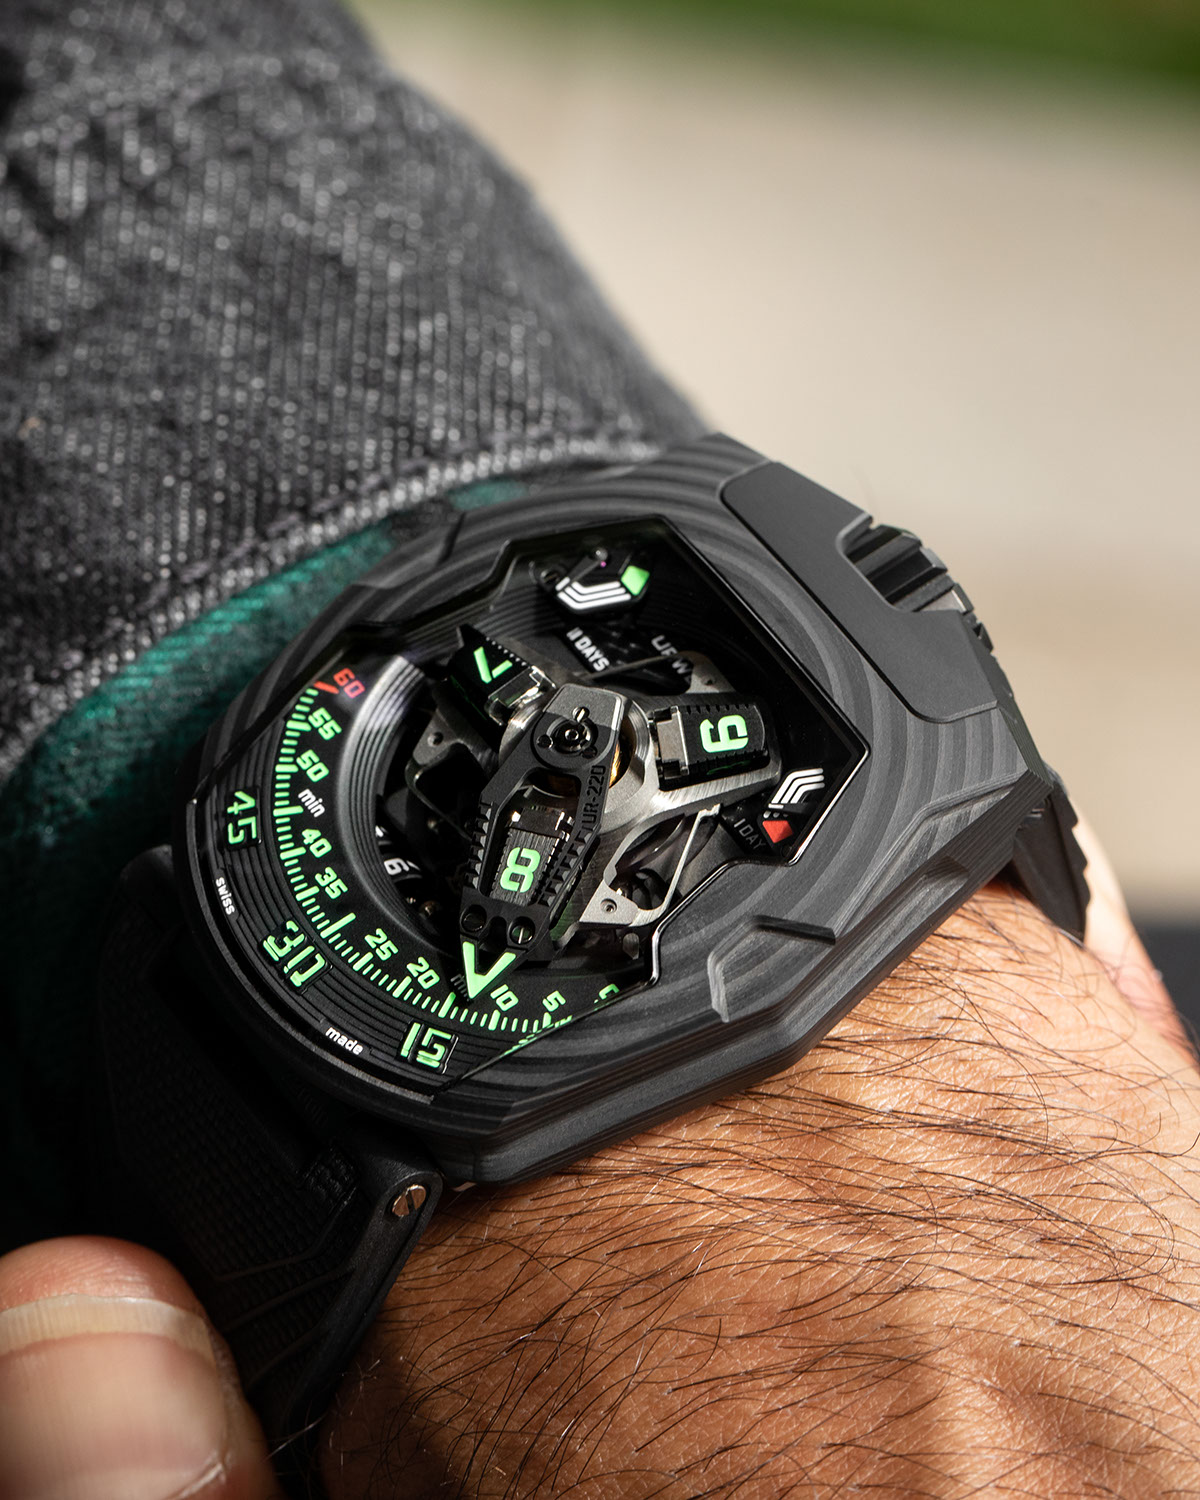 The URWERK UR-220 “Falcon Project” Carbon Edition on the wrist